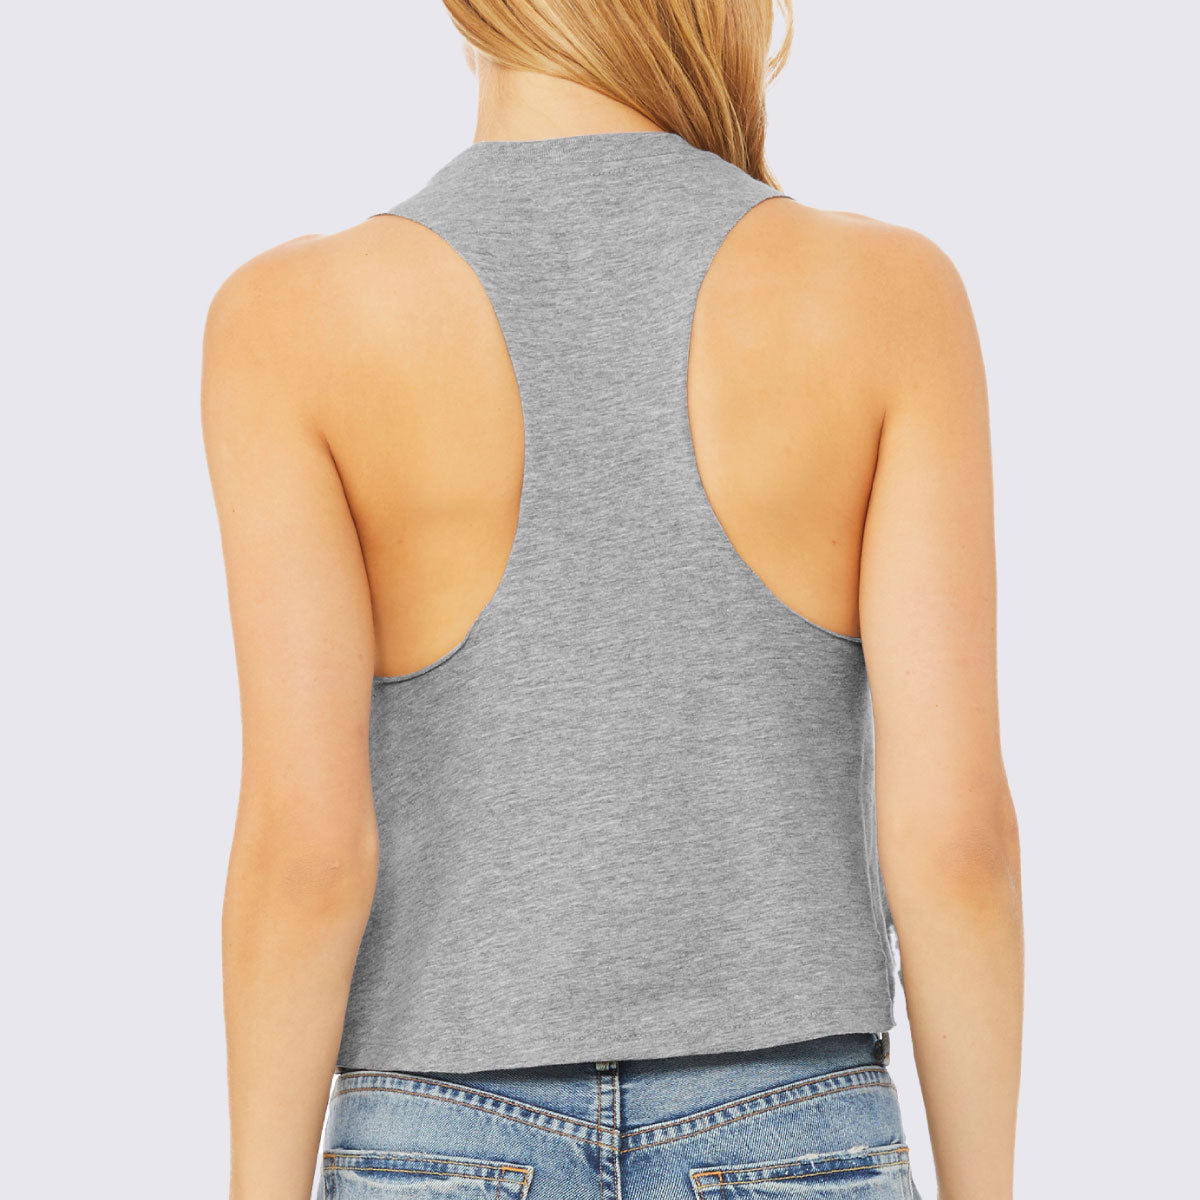 Workout Tank Racerback Cropped Tank - The LFT Clothing Company